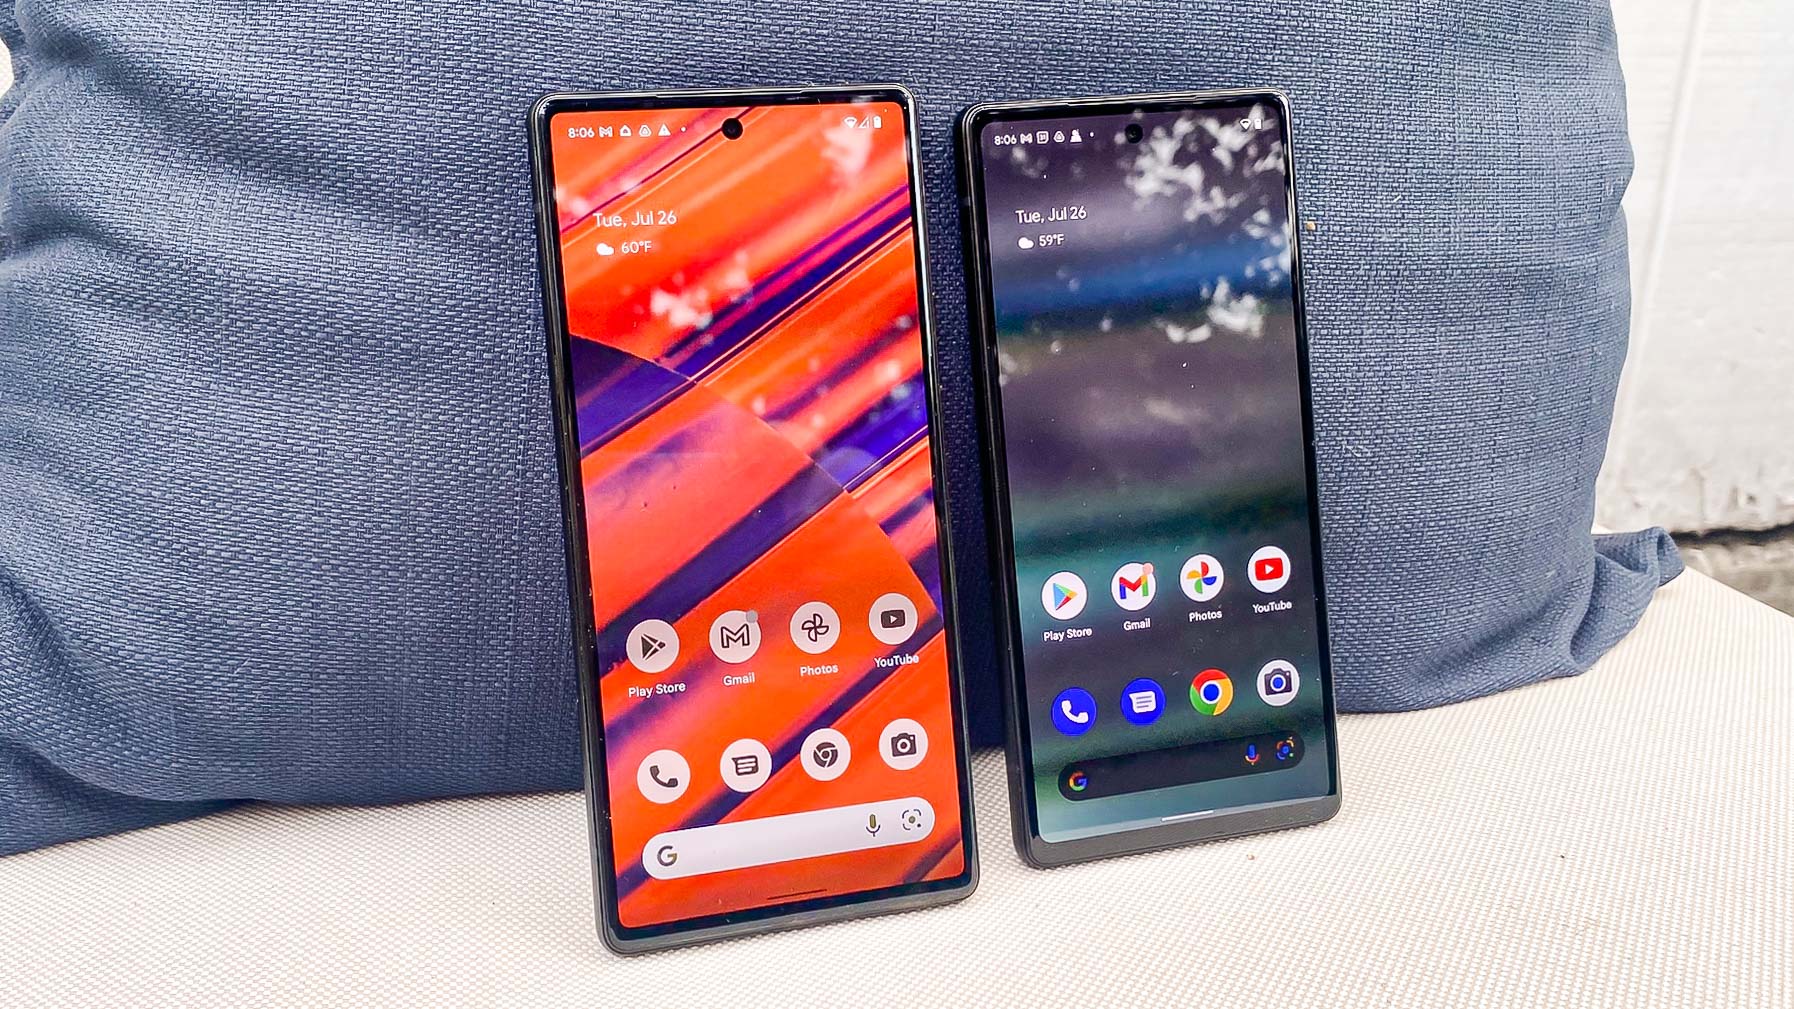 Google Pixel 6a vs. Pixel 6: What are the differences? | Tom's Guide